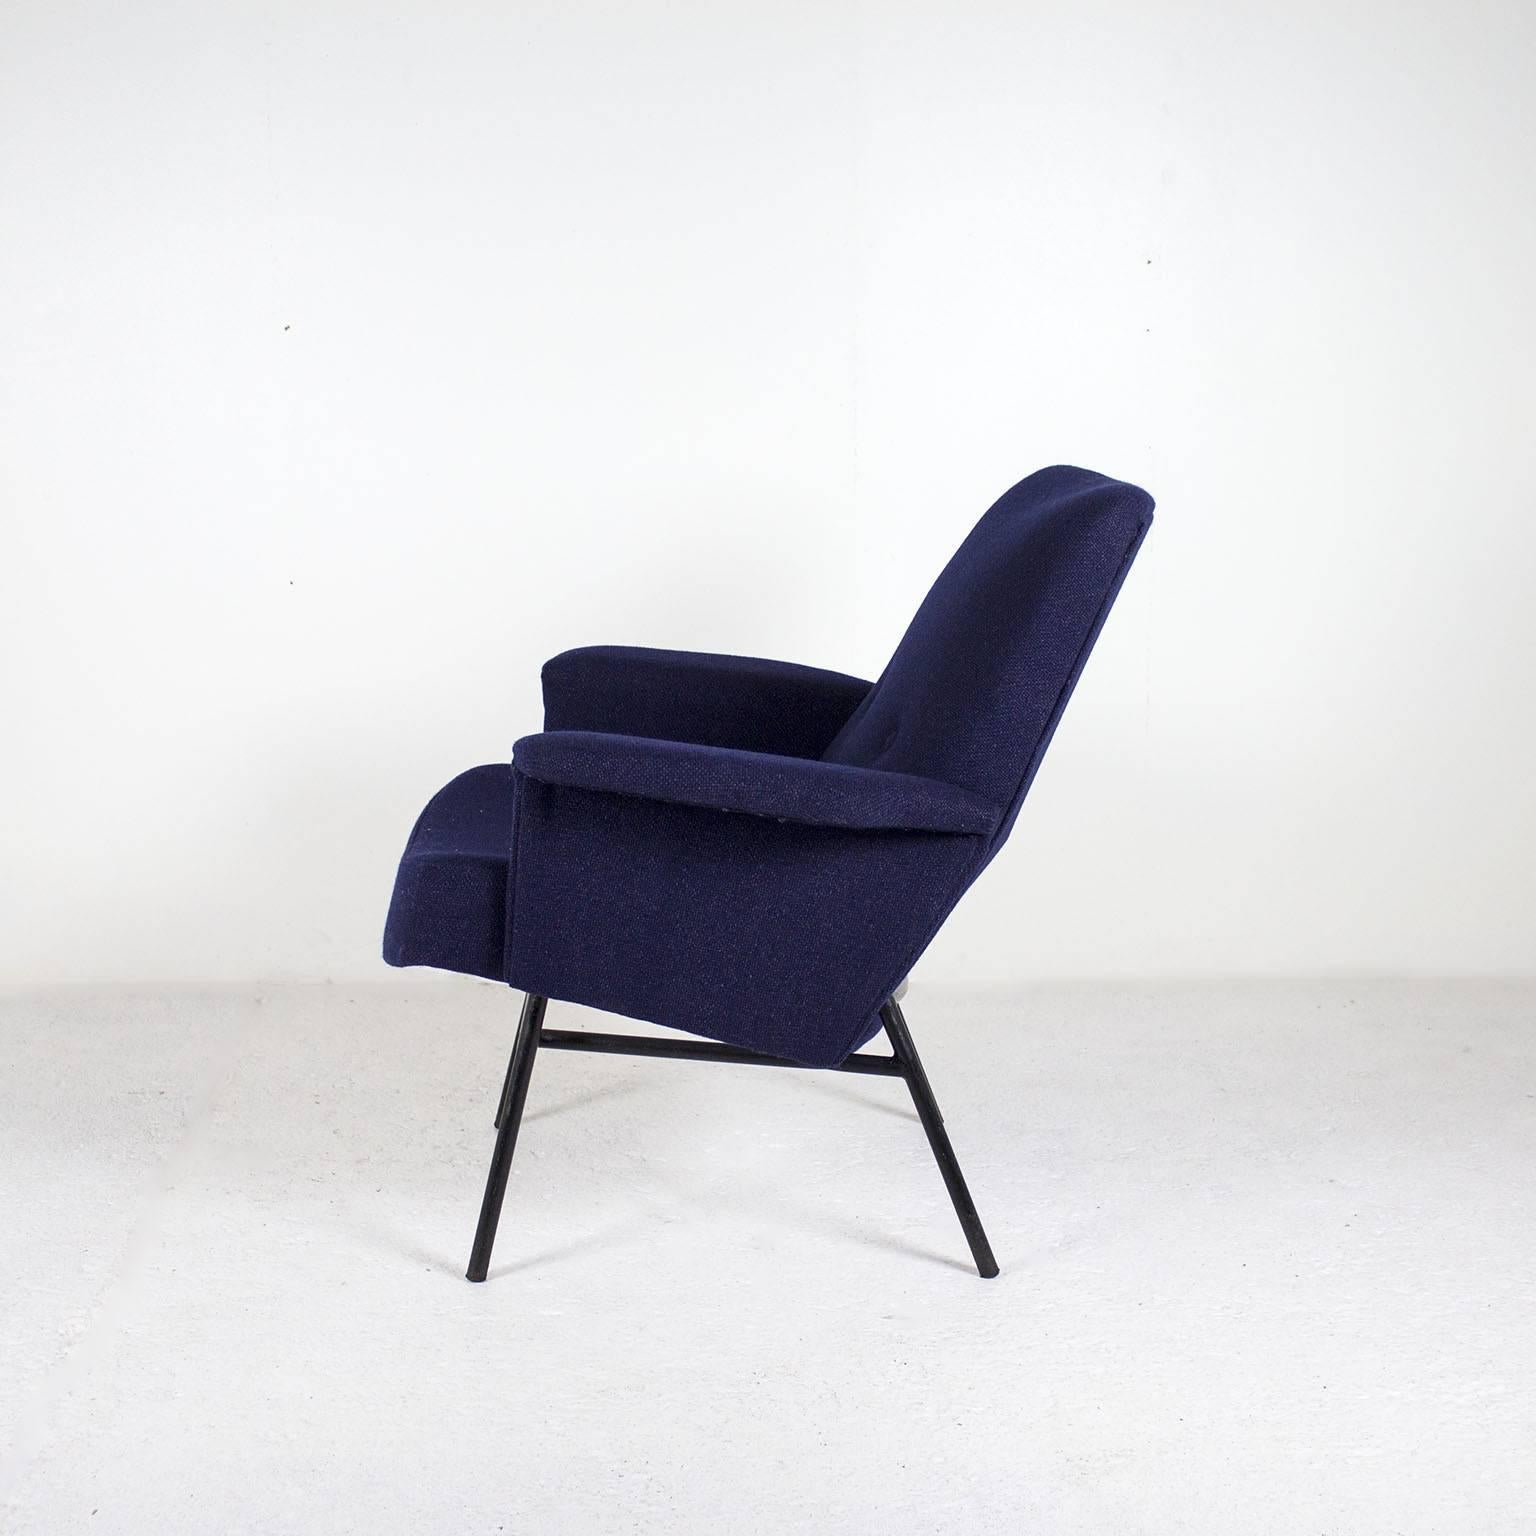 French Pair of Armchairs SK660 by Pierre Guariche for Steiner, 1950 For Sale